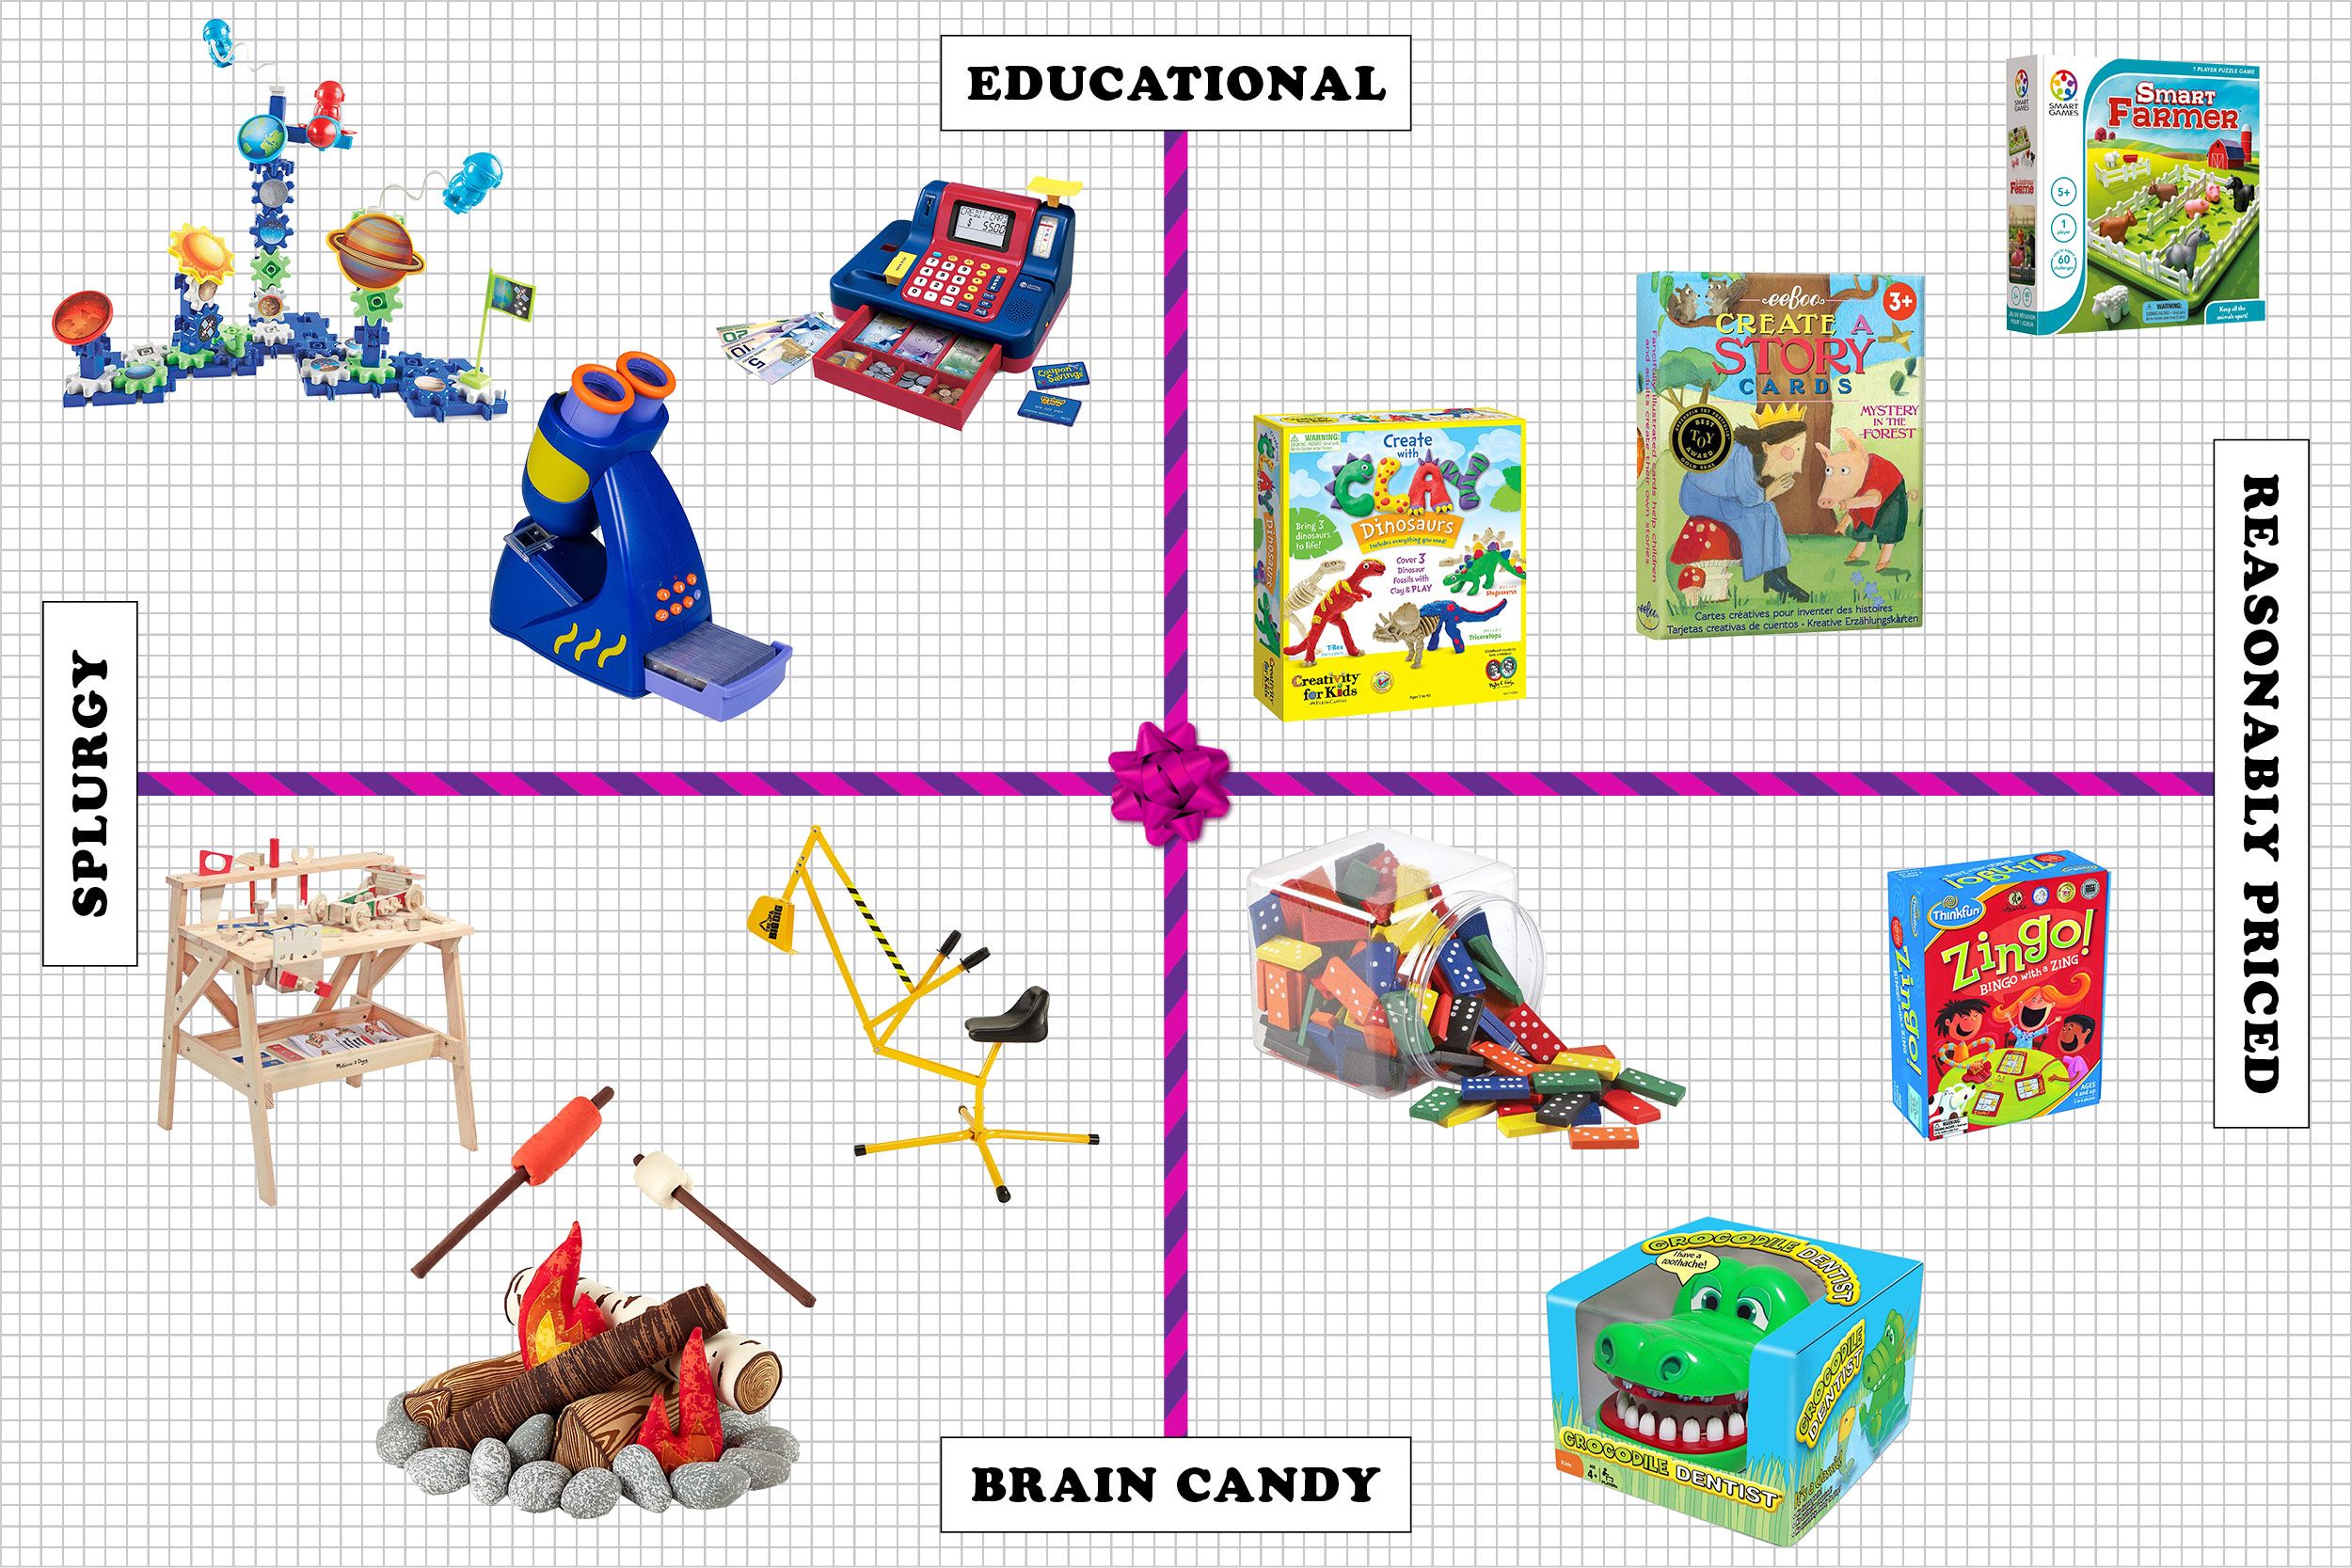 Kids Card's Educational Christmas Vocabulary Building Game Similar To DOBLE 